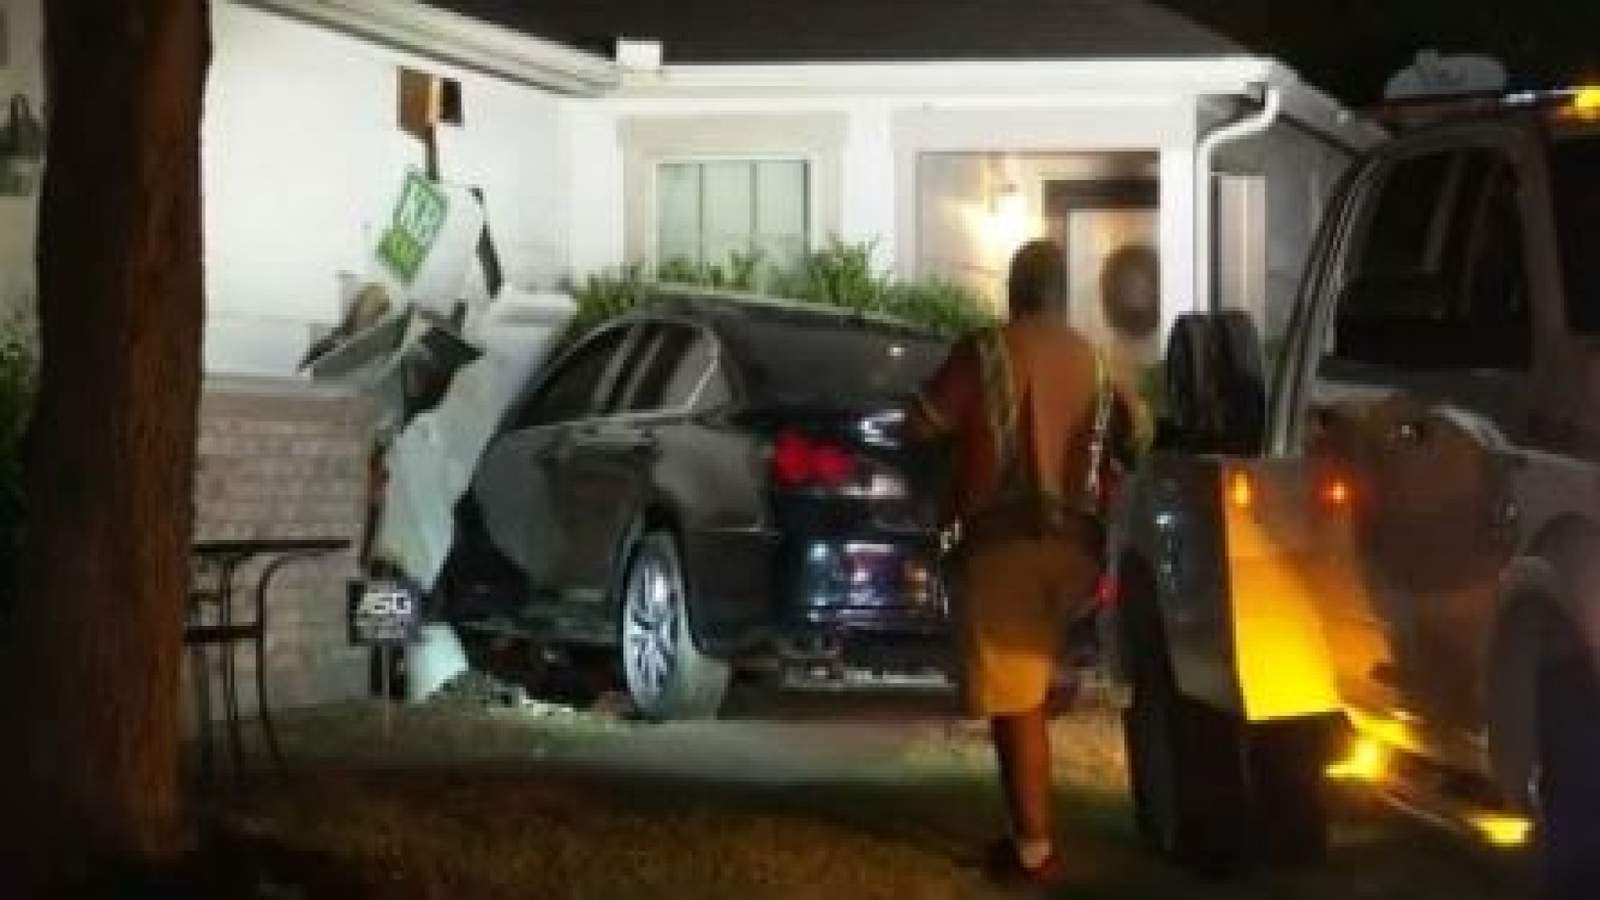 Suspected drunk driver crashes into garage of home, deputies say